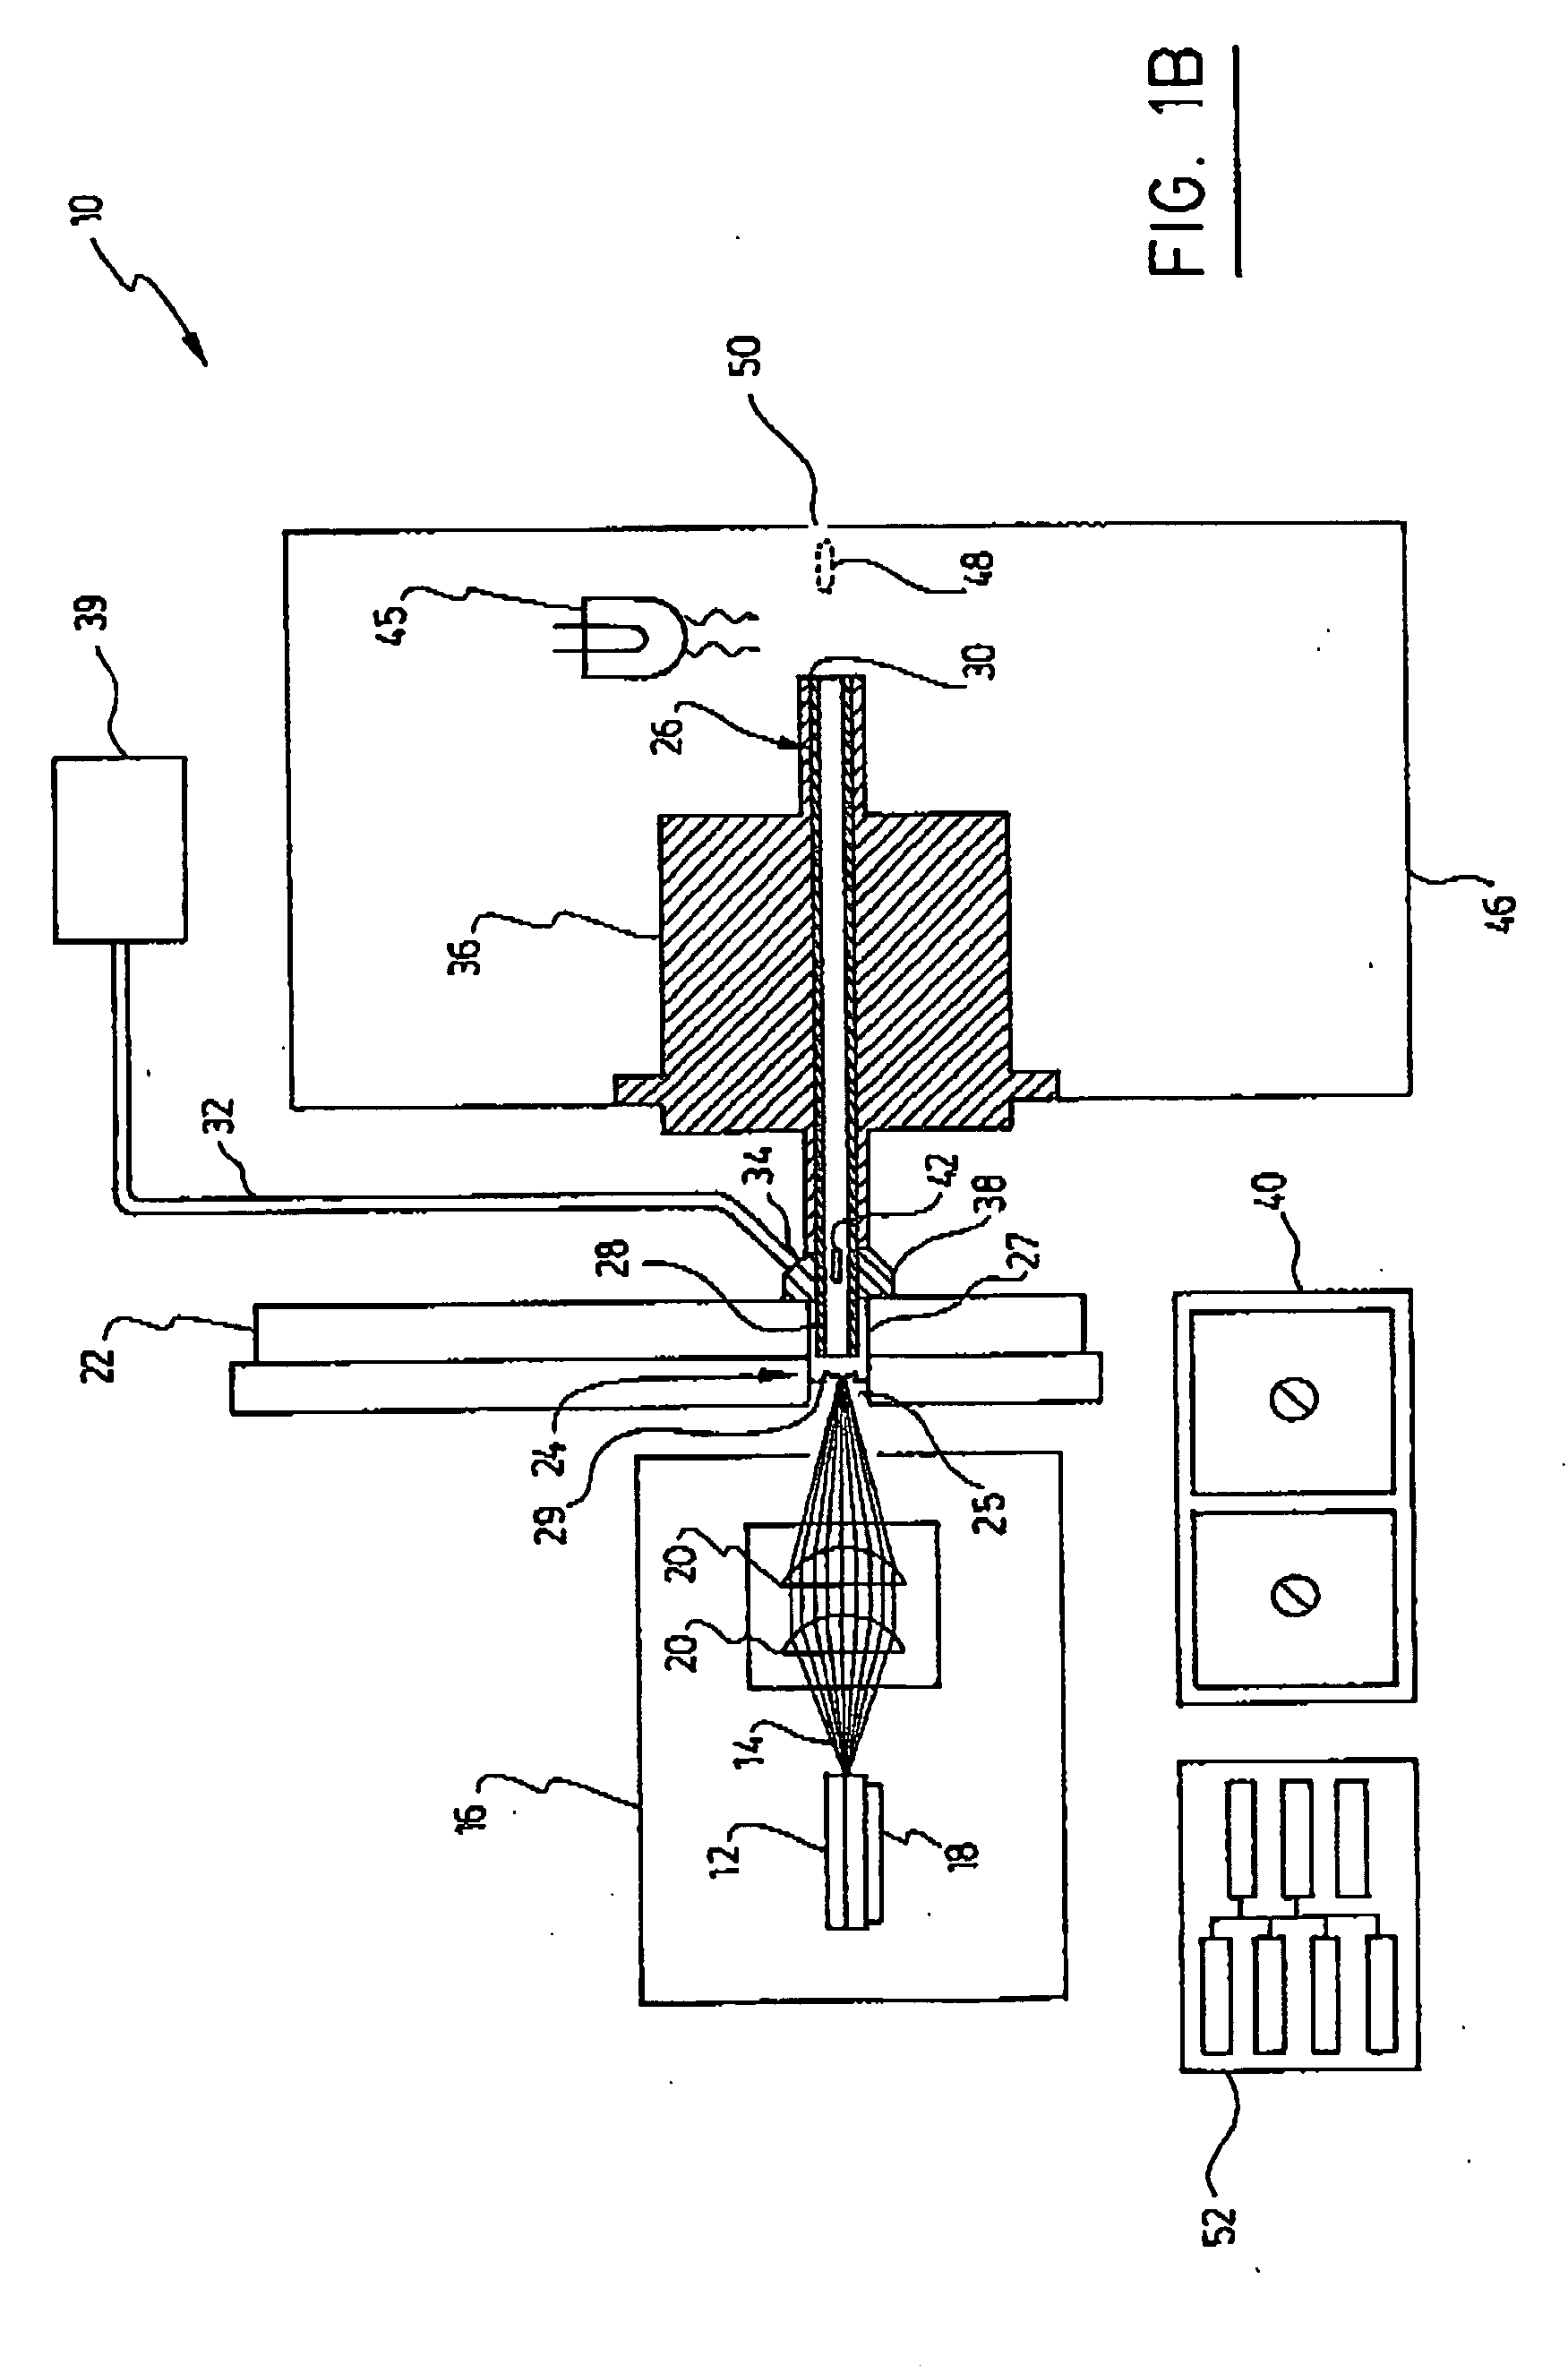 Ionization source for mass spectrometer